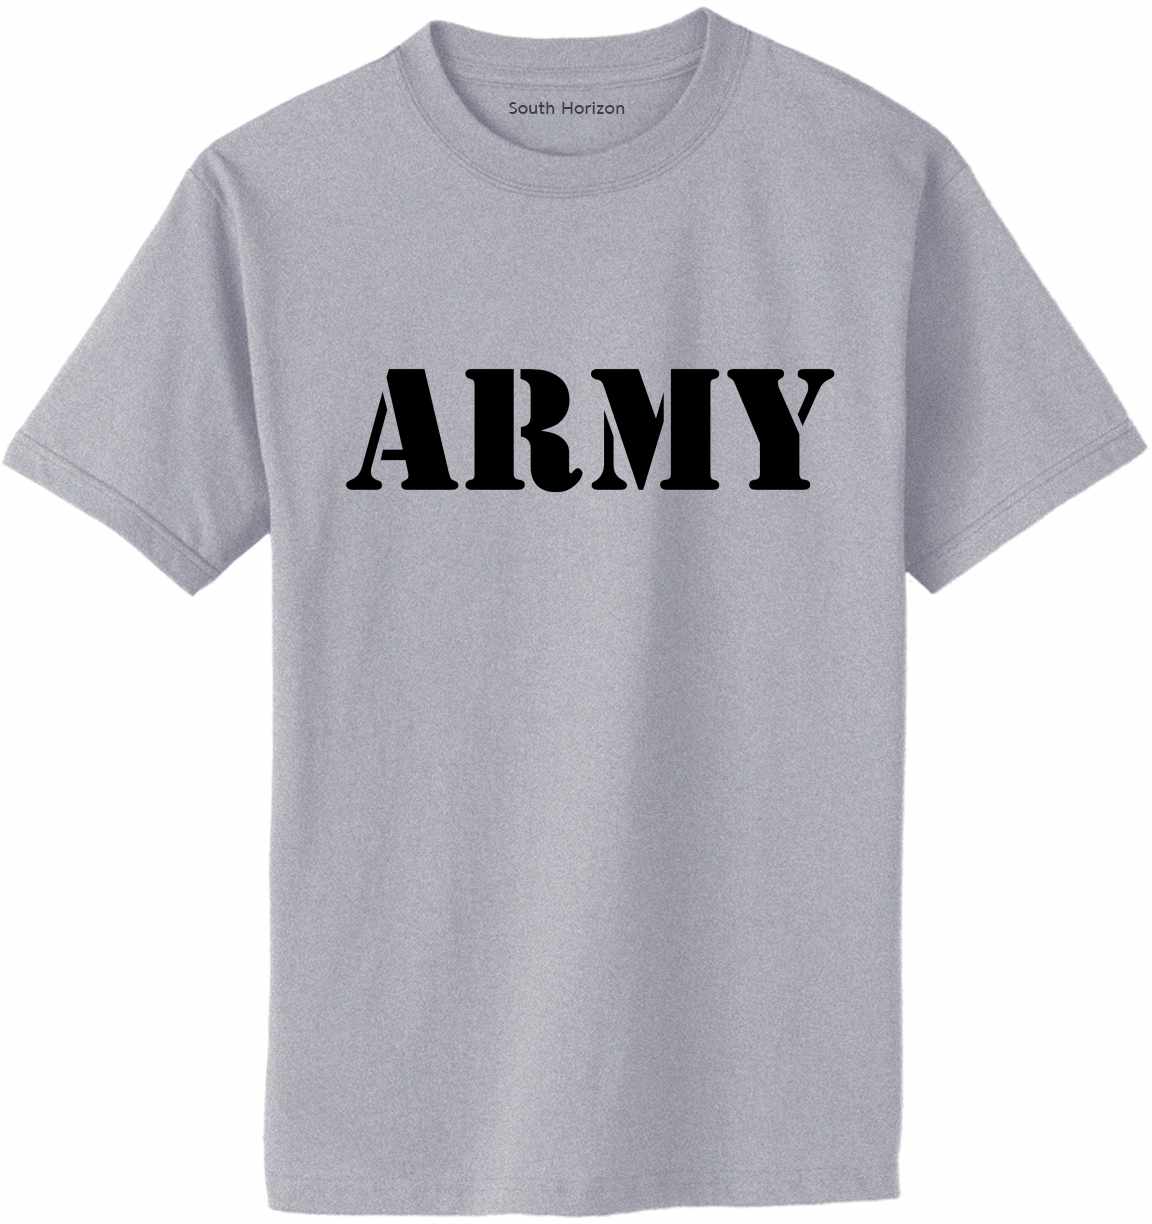 ARMY Adult T-Shirt (#338-1)